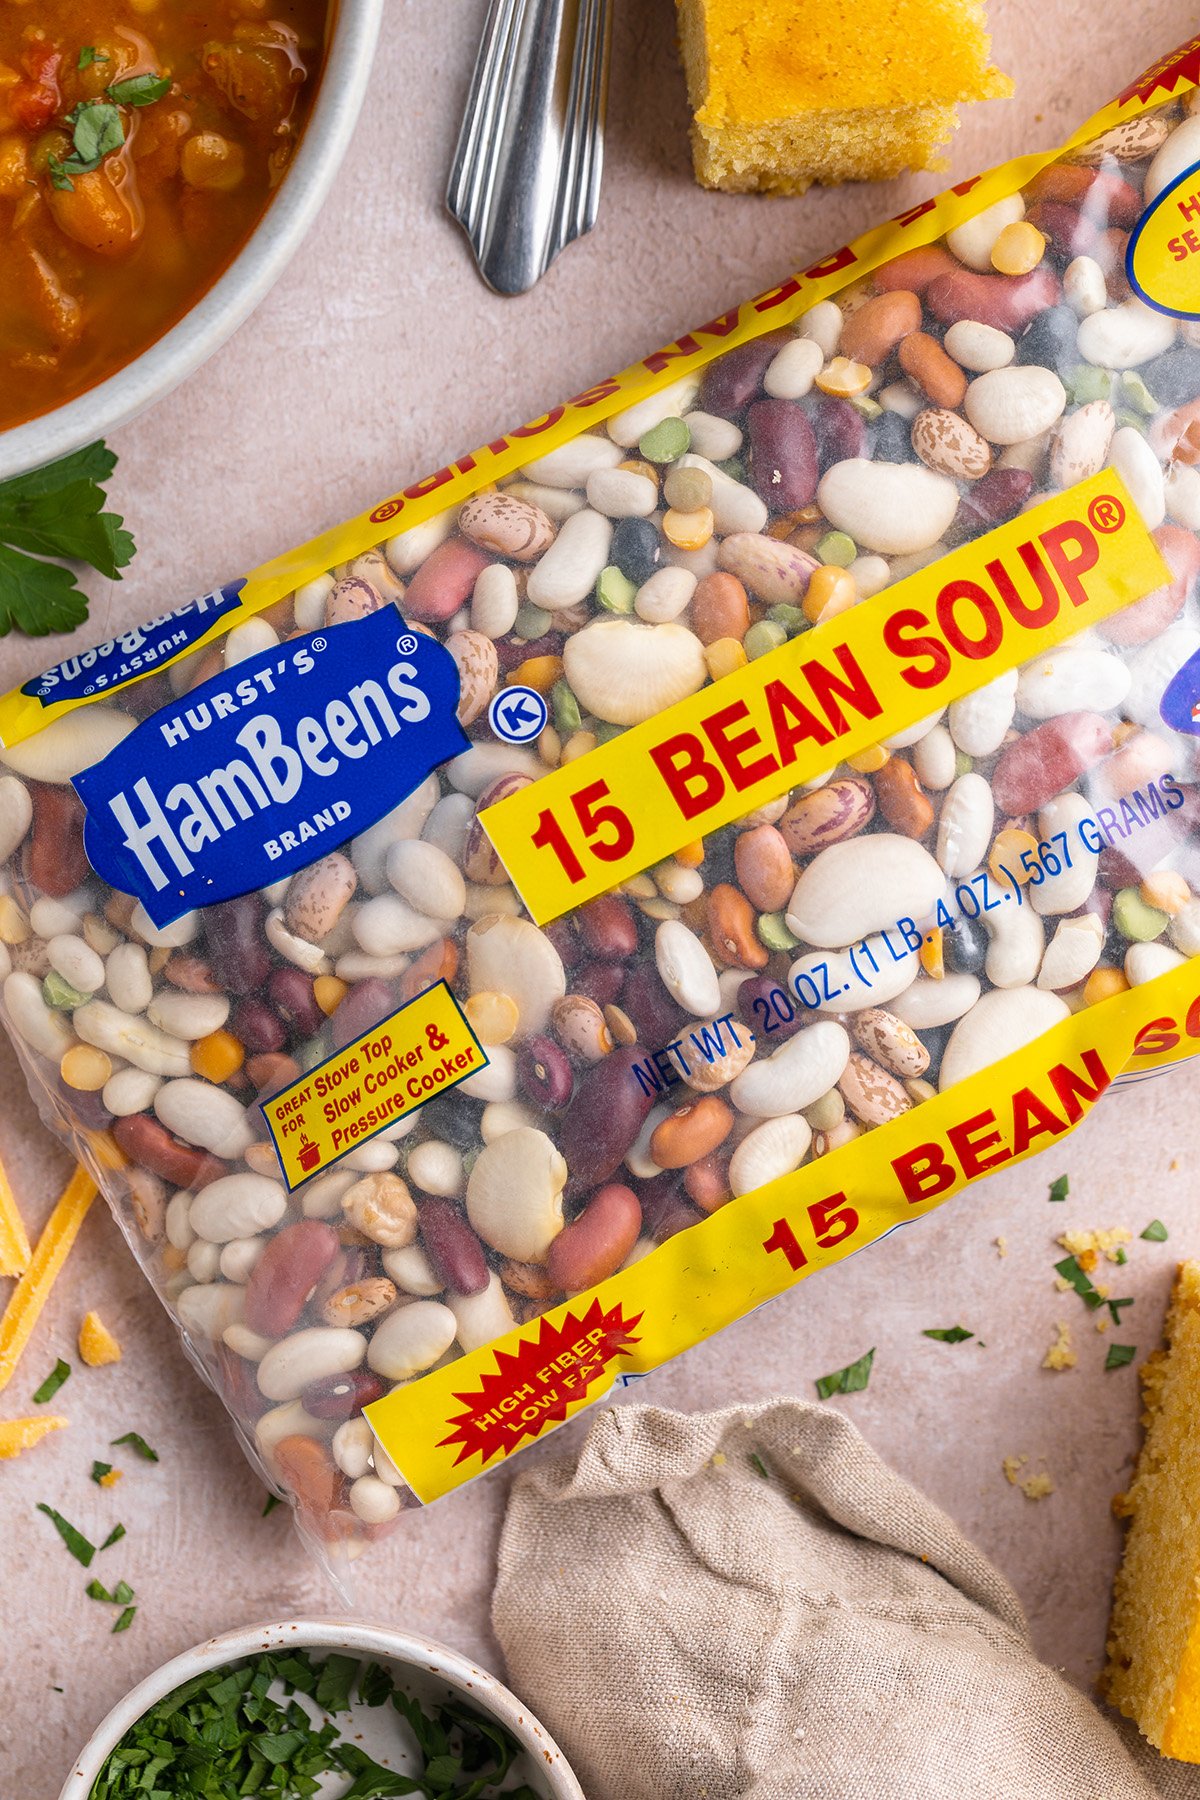 Hurst HamBeens 15-bean soup mix in branded packaging on a table with cornbread and 15-bean soup.